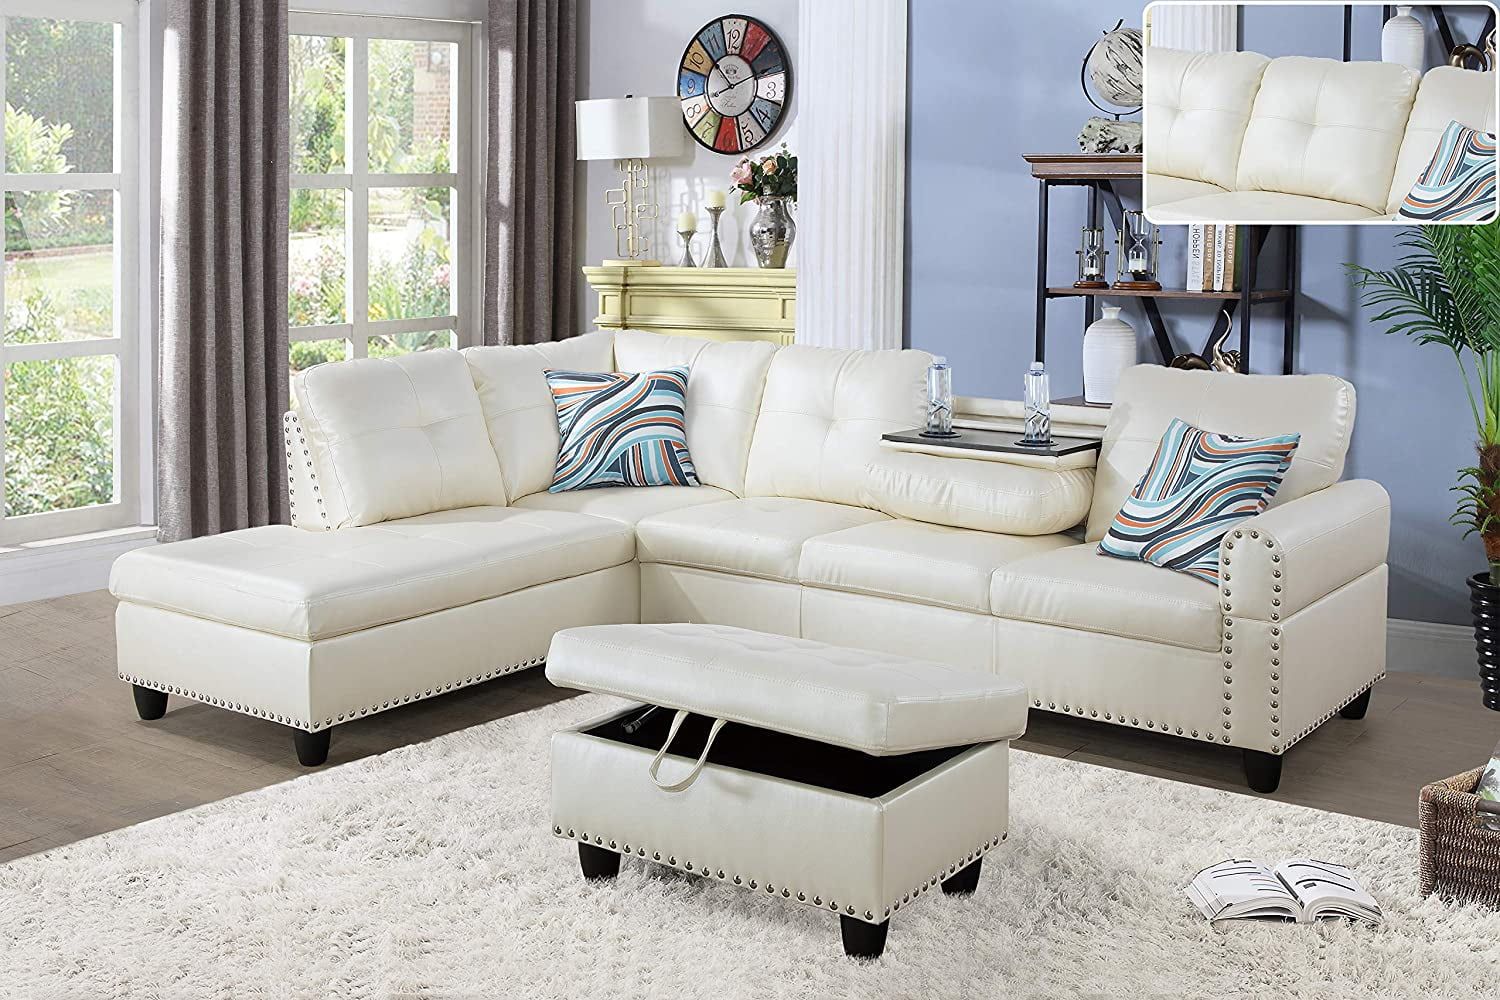 Ainehome Faux Leather Sectional Sofa, Living Room Set With Drop Down Table  & Cup Holder – White – Walmart Regarding Faux Leather Sectional Sofa Sets (View 15 of 15)